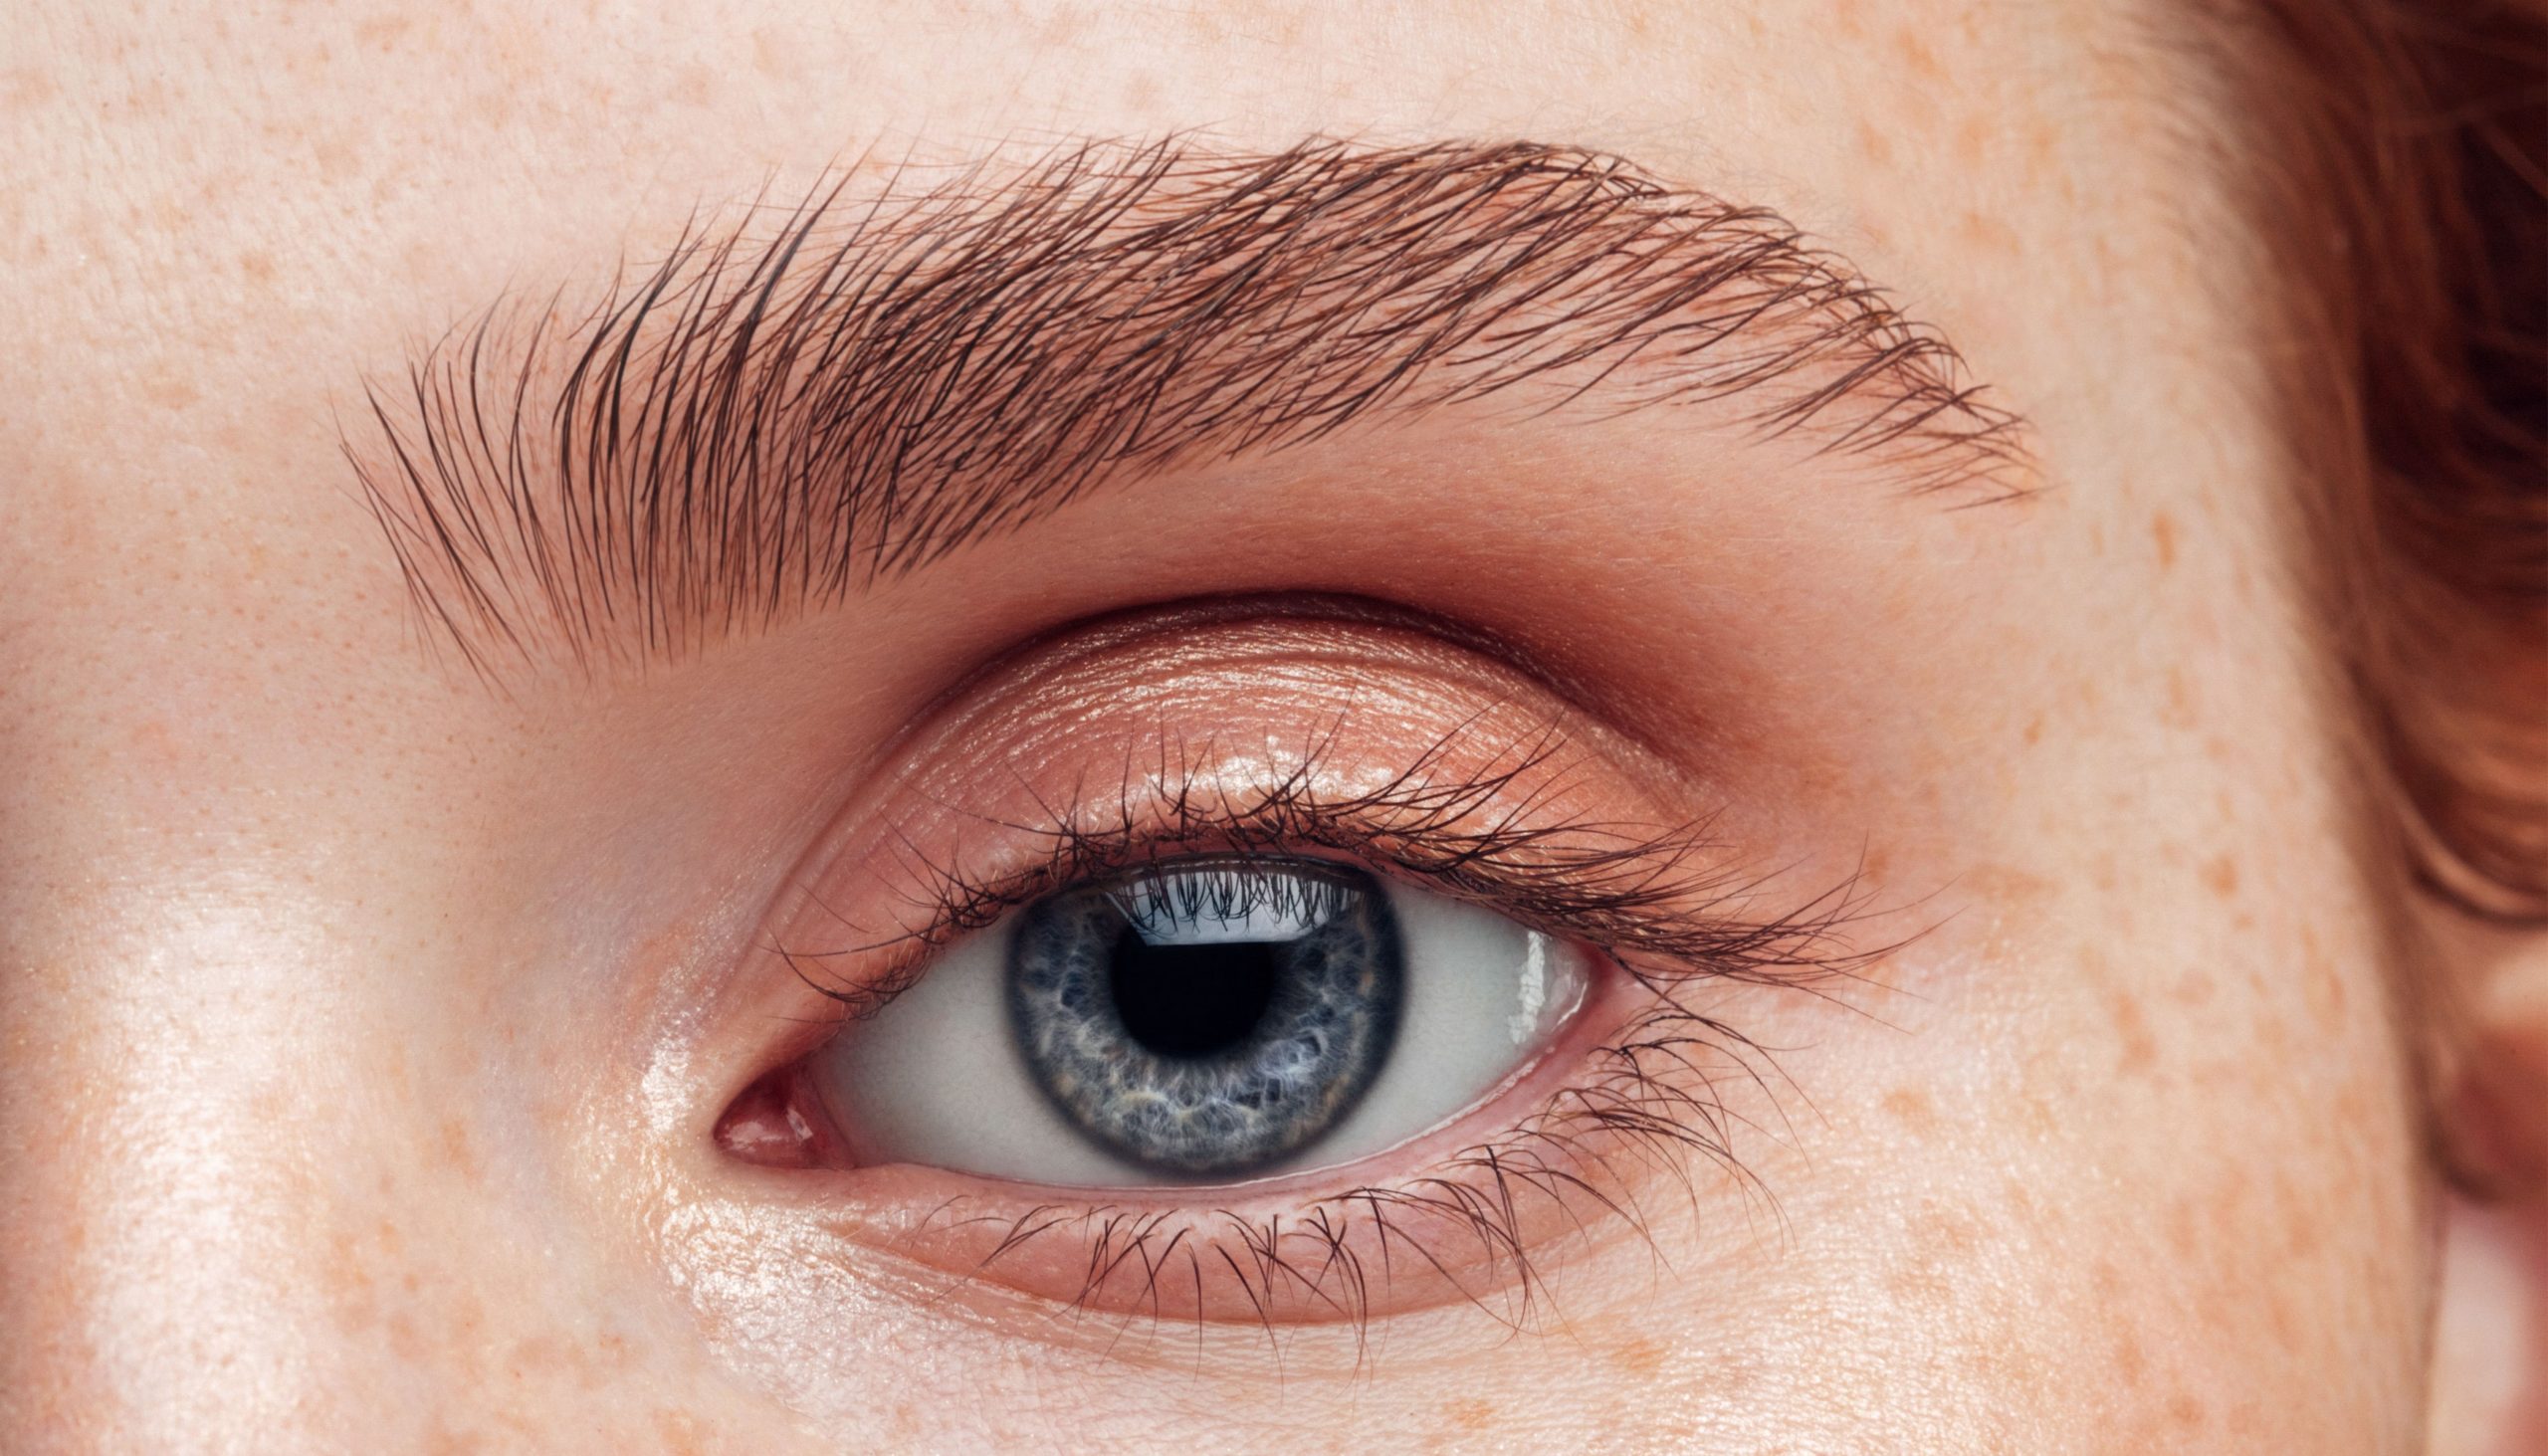 These Realistic Temporary Eyebrow Tattoos Have TikTok Obsessed